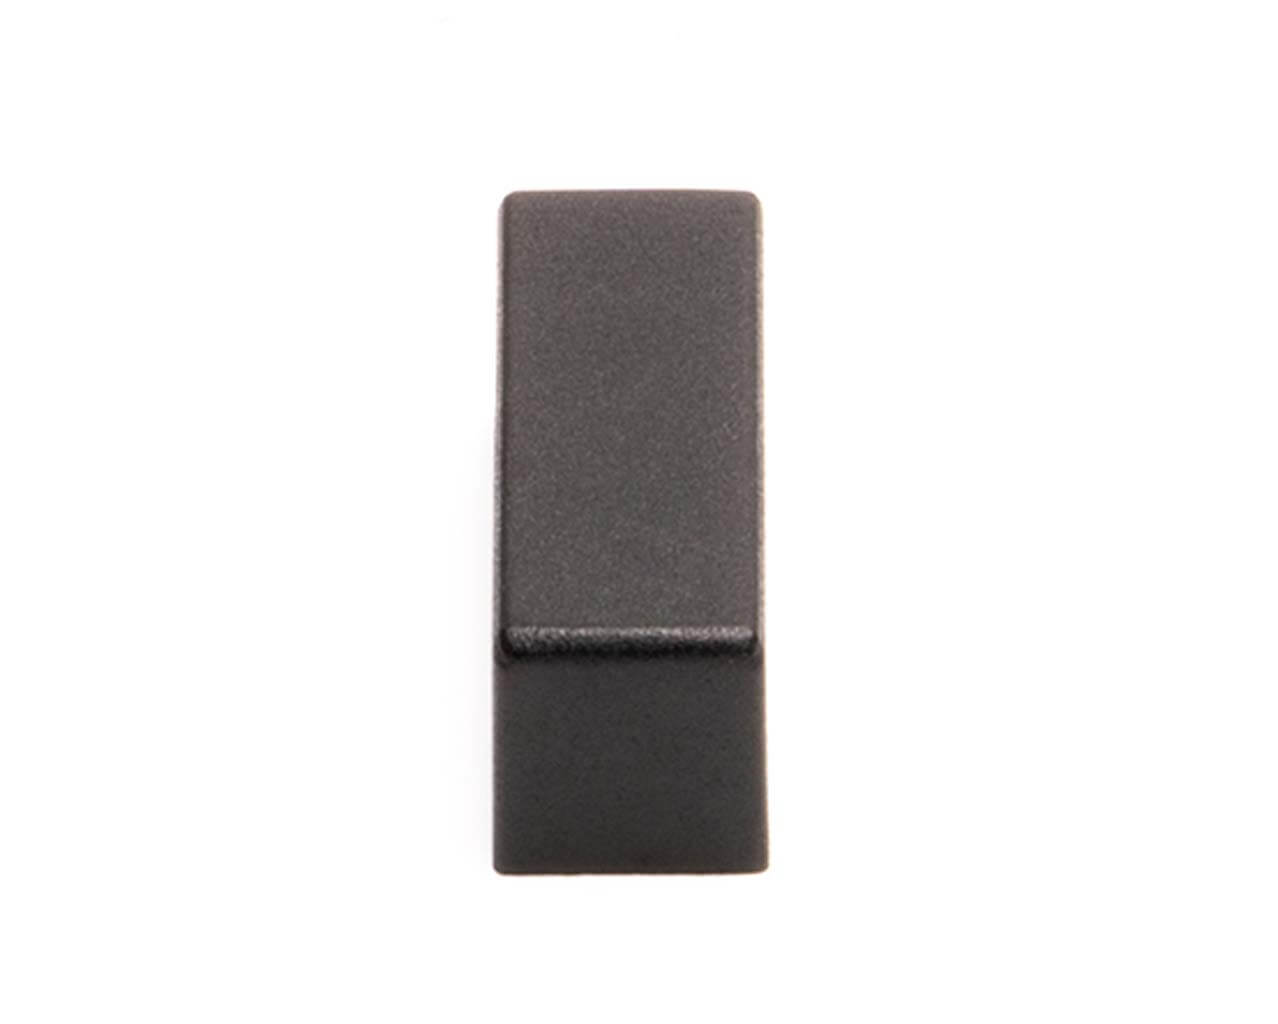 PrimoChill 4 Pin Molex Dust Cover - Black - 10 Pack - PrimoChill - KEEPING IT COOL